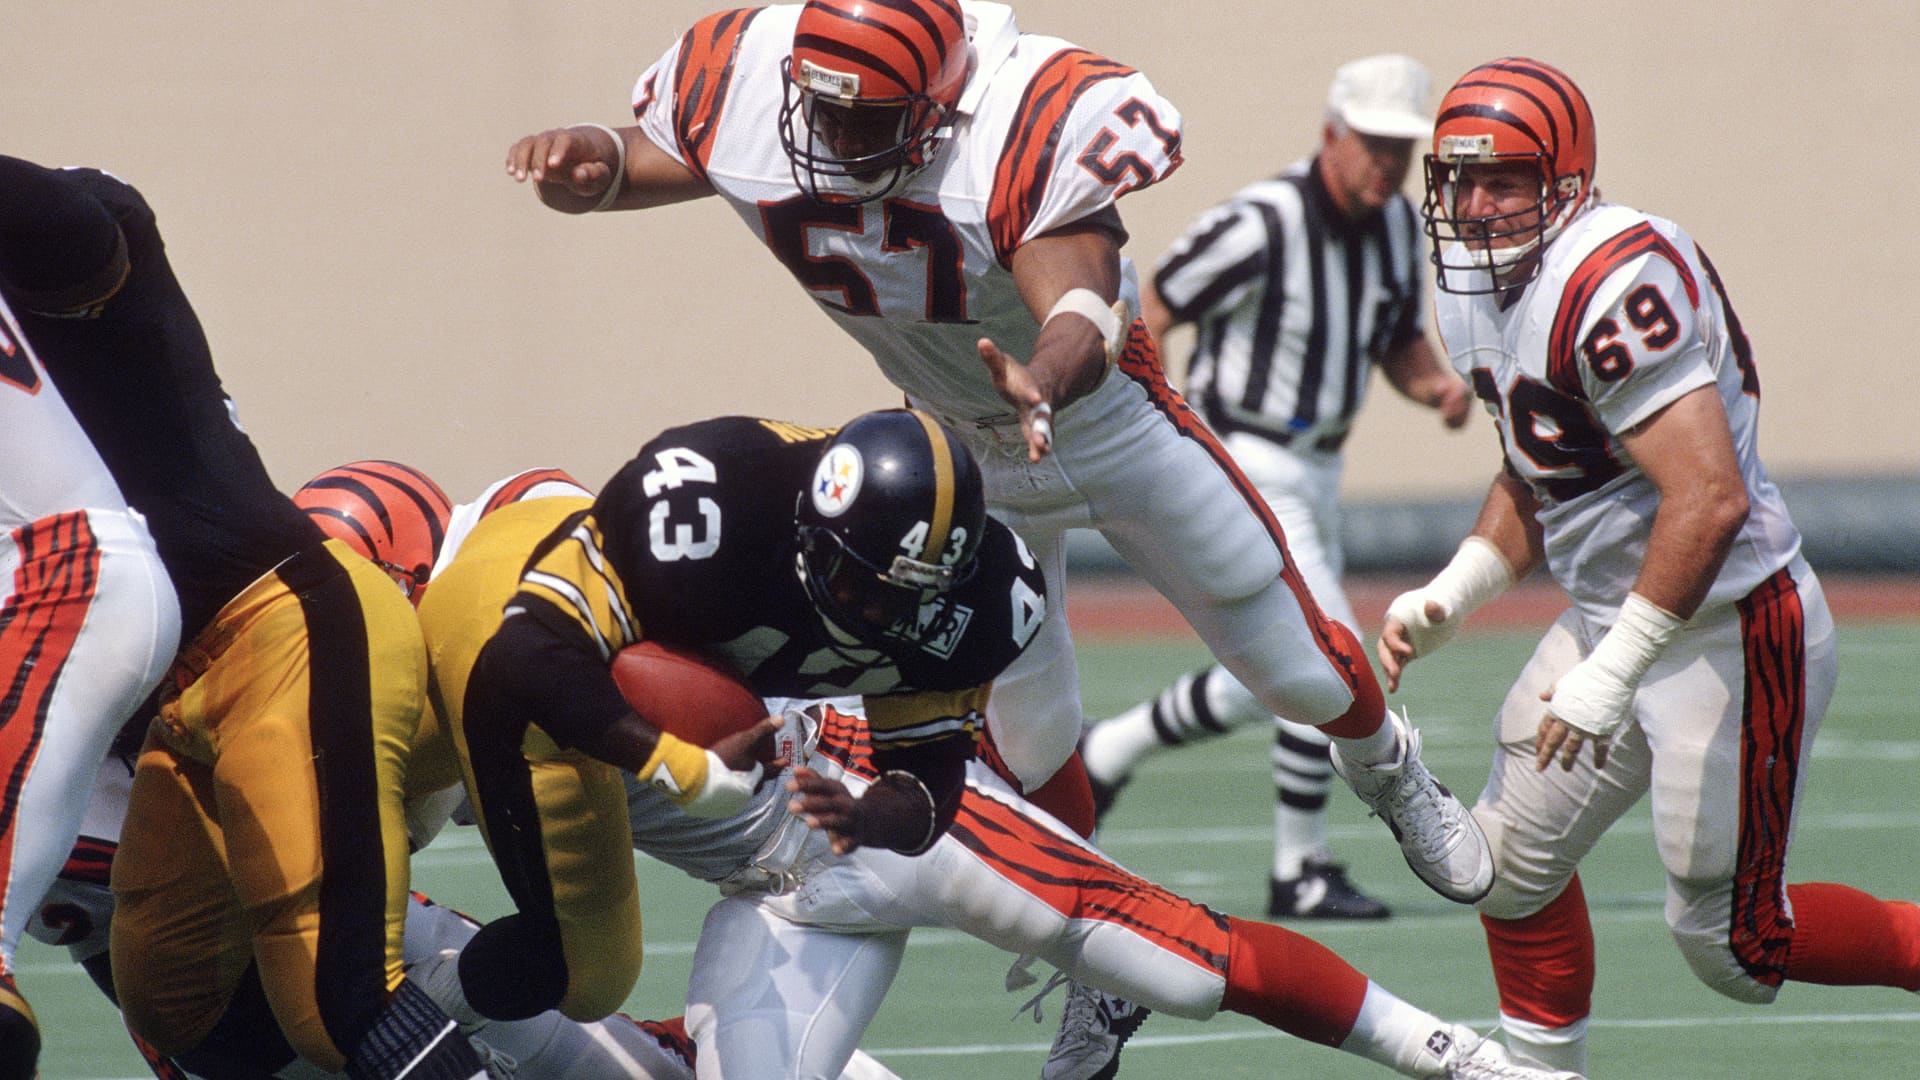 Reggie Williams #57 of the Cincinnati Bengals dives on top of Earnest Jackson #43 of the Pittsburgh Steelers during an NFL football game September 18, 1988 at Three Rivers Stadium in Pittsburgh, Pennsylvania. Williams played for the Bengals from 1976-89.